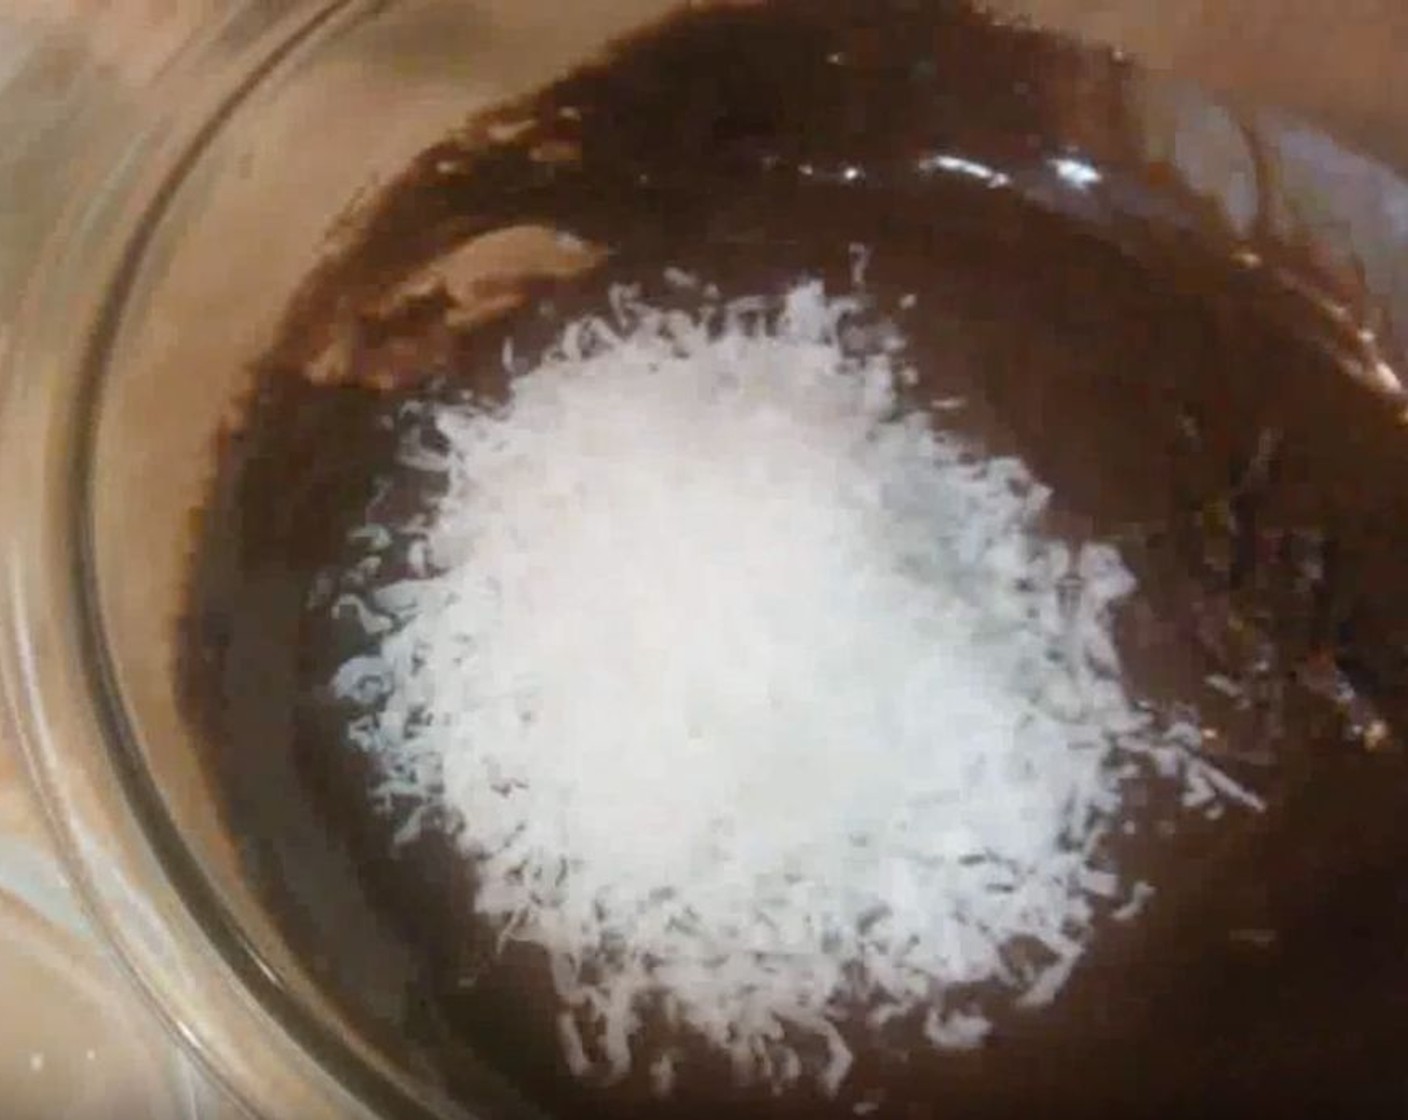 step 3 Add Coconut Flakes (1/2 cup) and stir to combine.